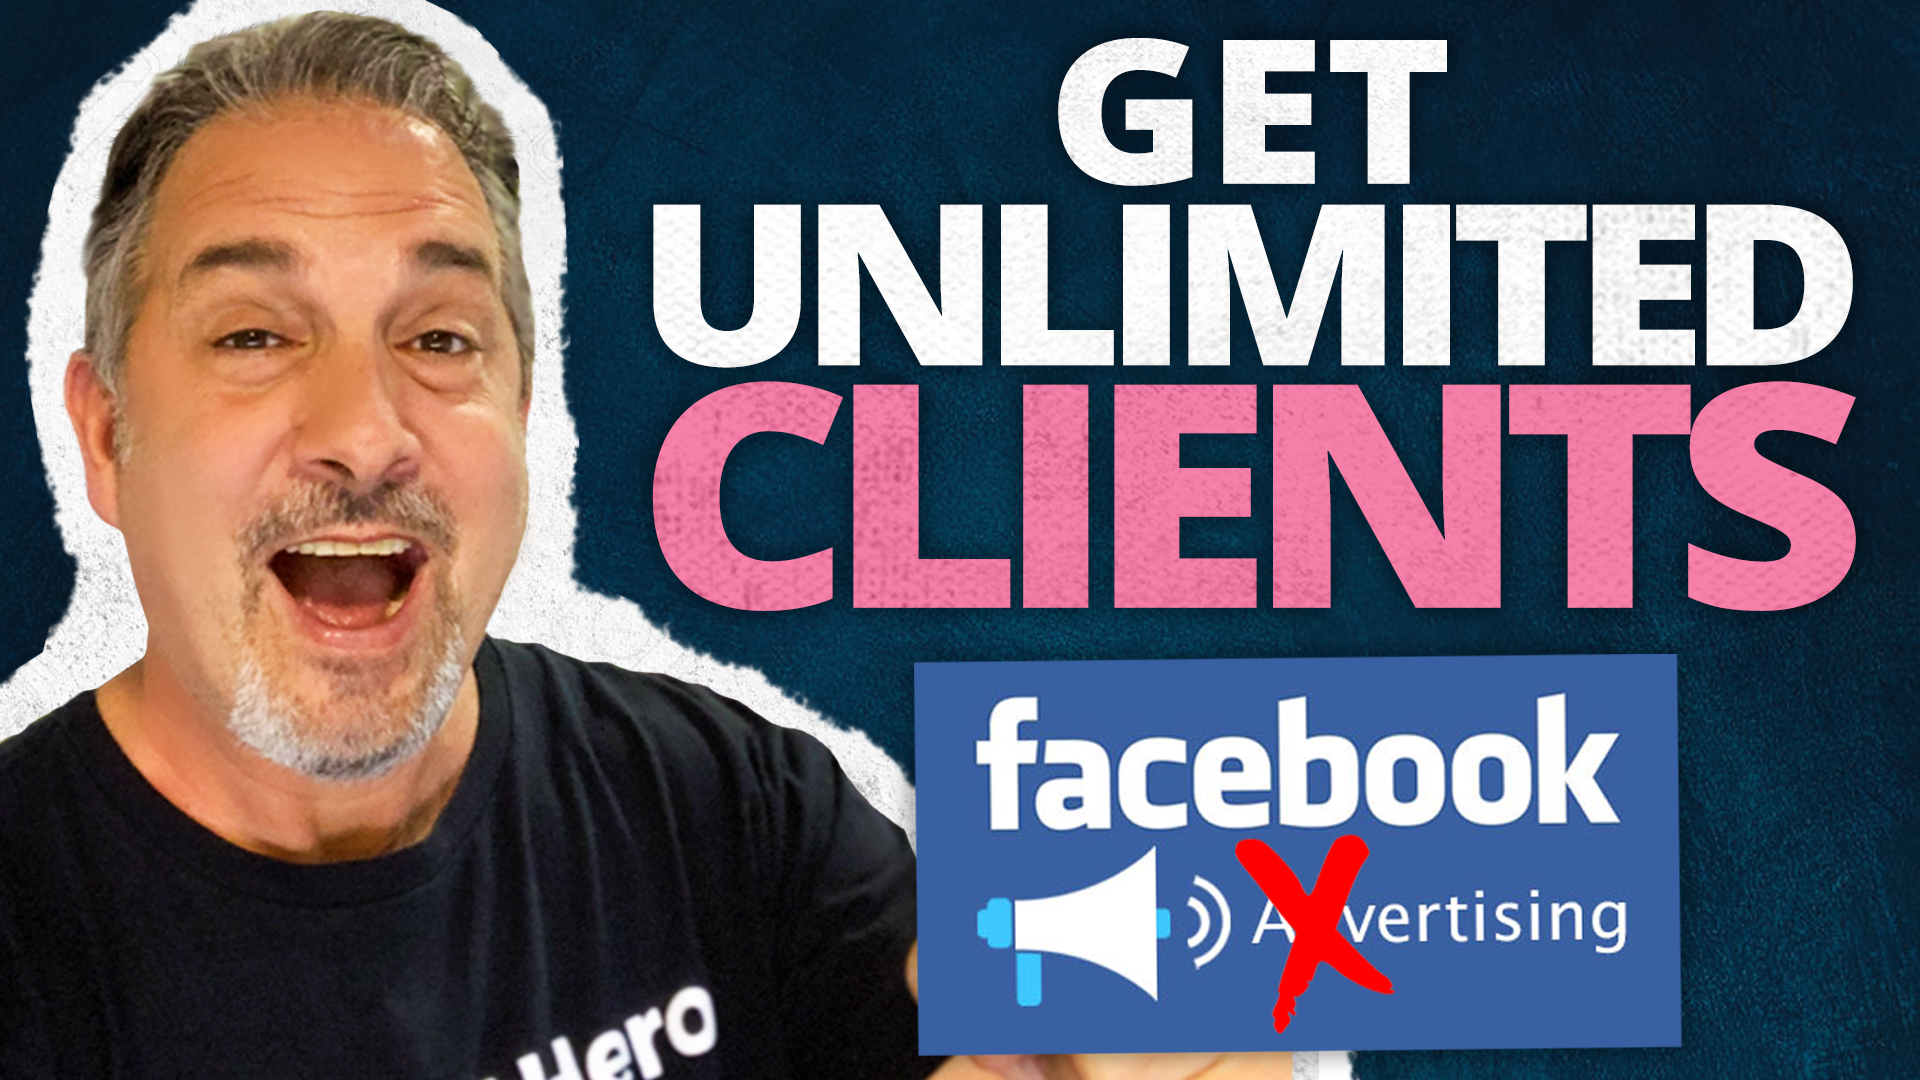 How To Get Unlimited Credit Repair Clients Without Paying For Advertising